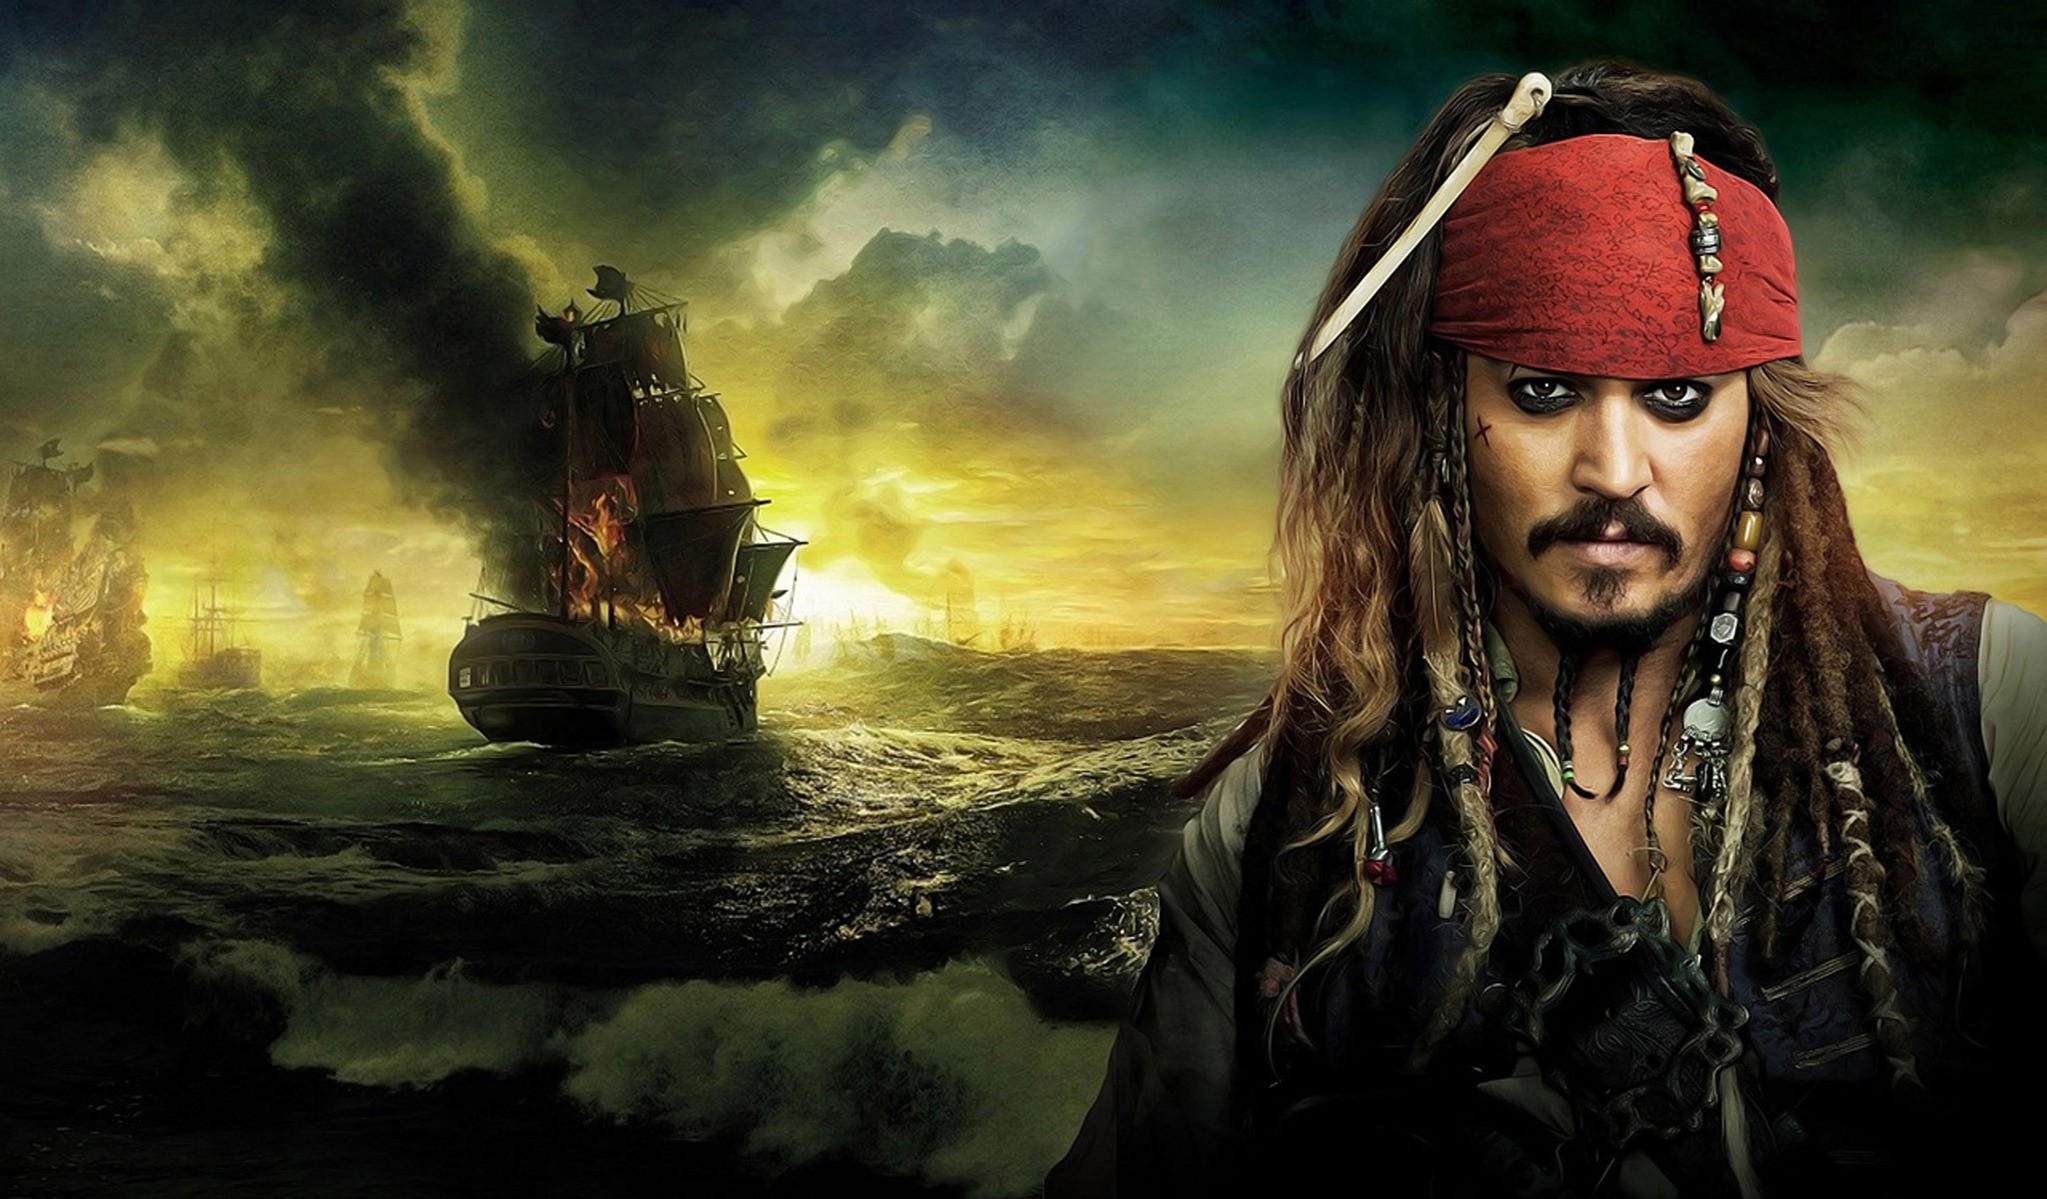 Jack Sparrow might be inspired by a Muslim captain